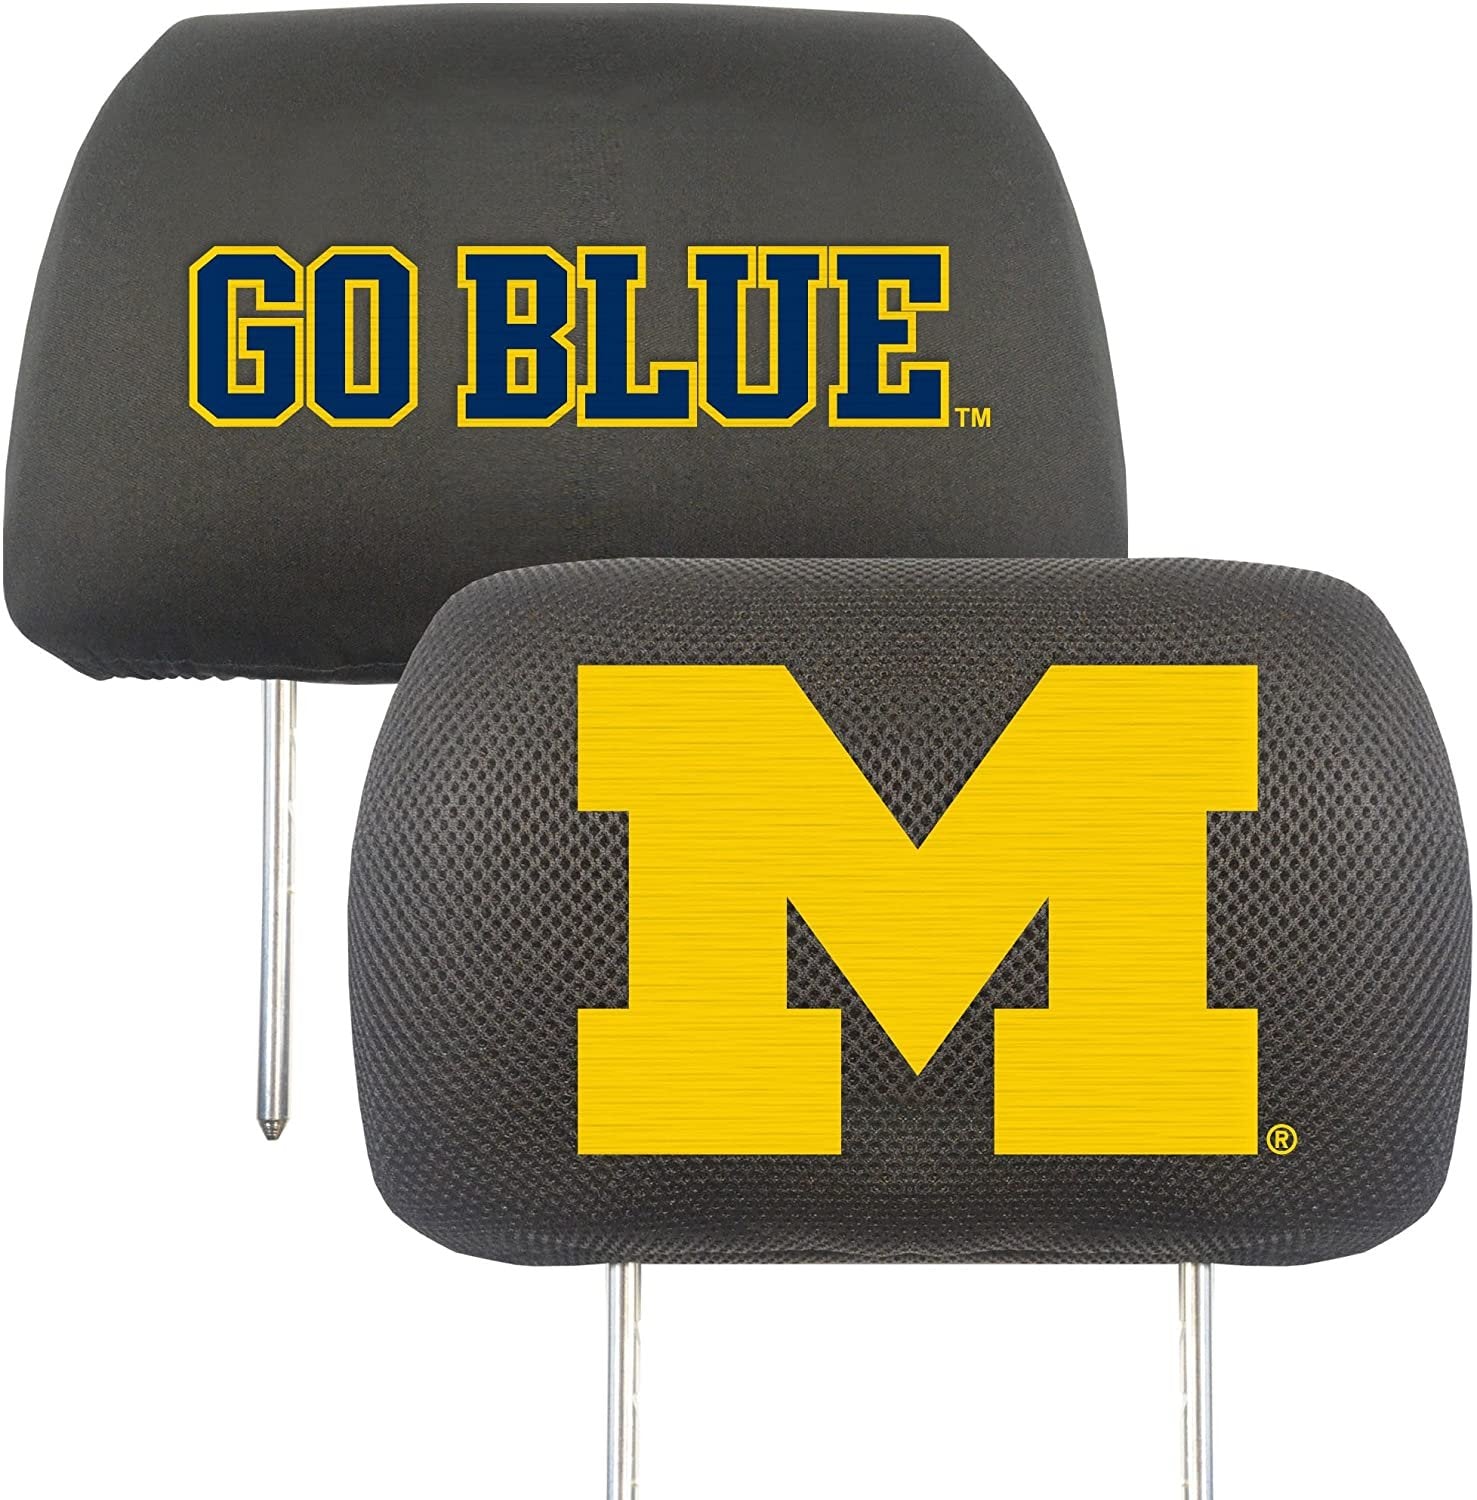 University of Michigan Wolverines Pair of Premium Auto Head Rest Covers, Embroidered, Black Elastic, 14x10 Inch